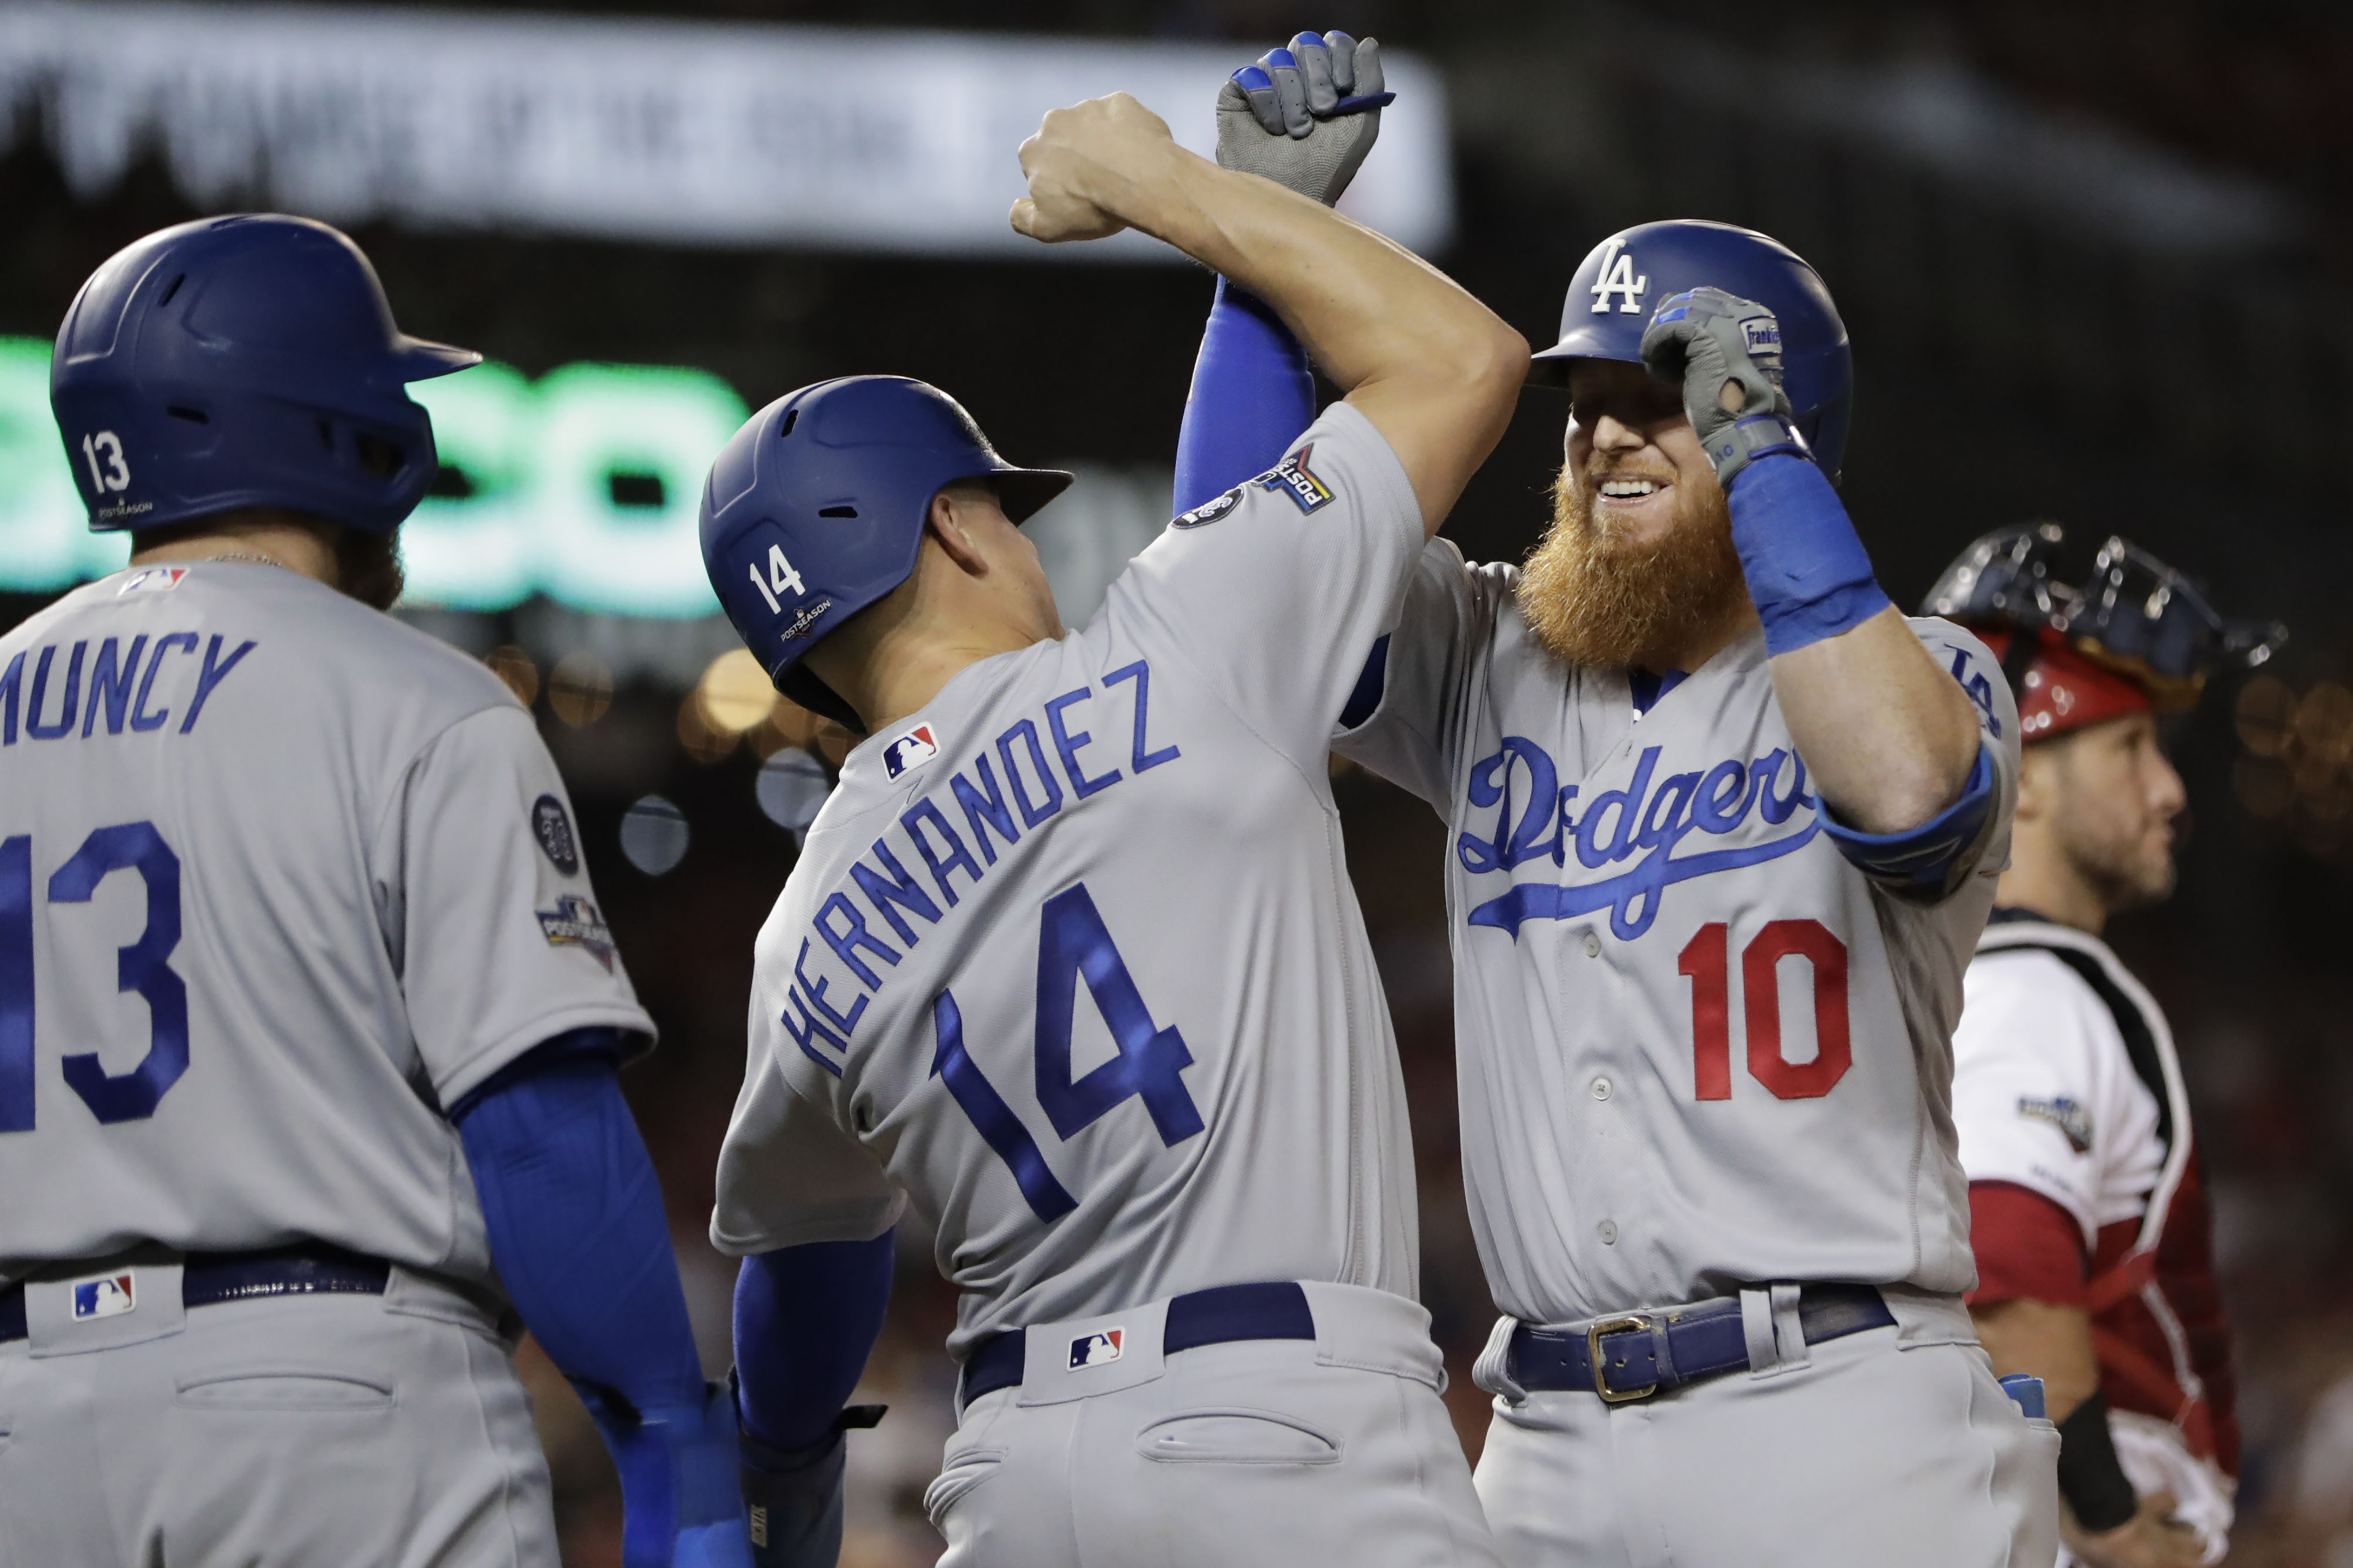 7 2-out runs in 6th lift LA past Nats 10-4 for 2-1 NLDS lead